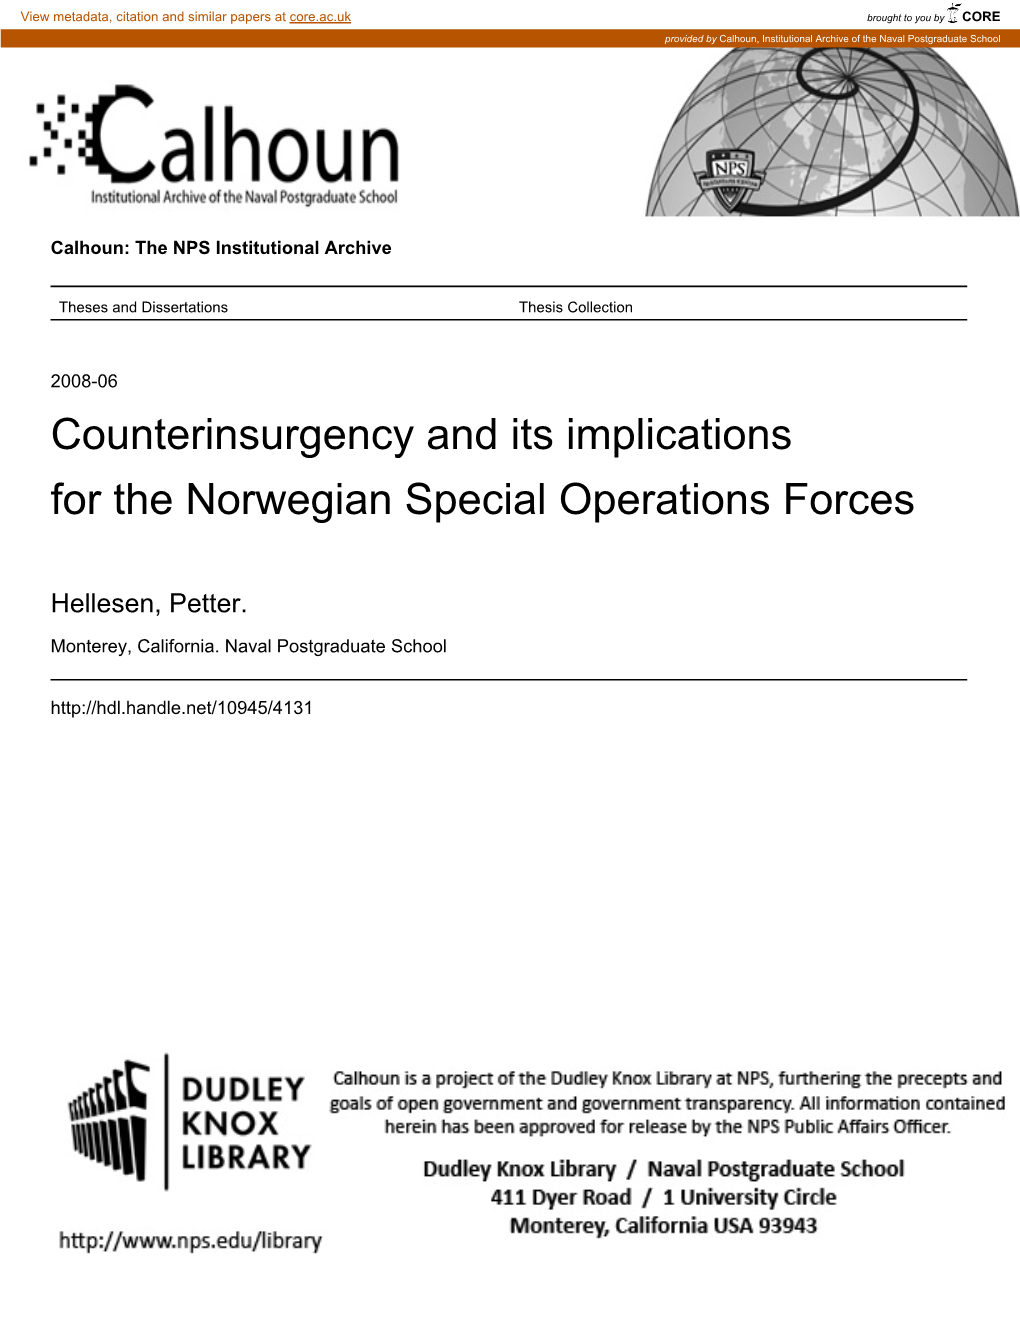 Counterinsurgency and Its Implications for the Norwegian Special Operations Forces